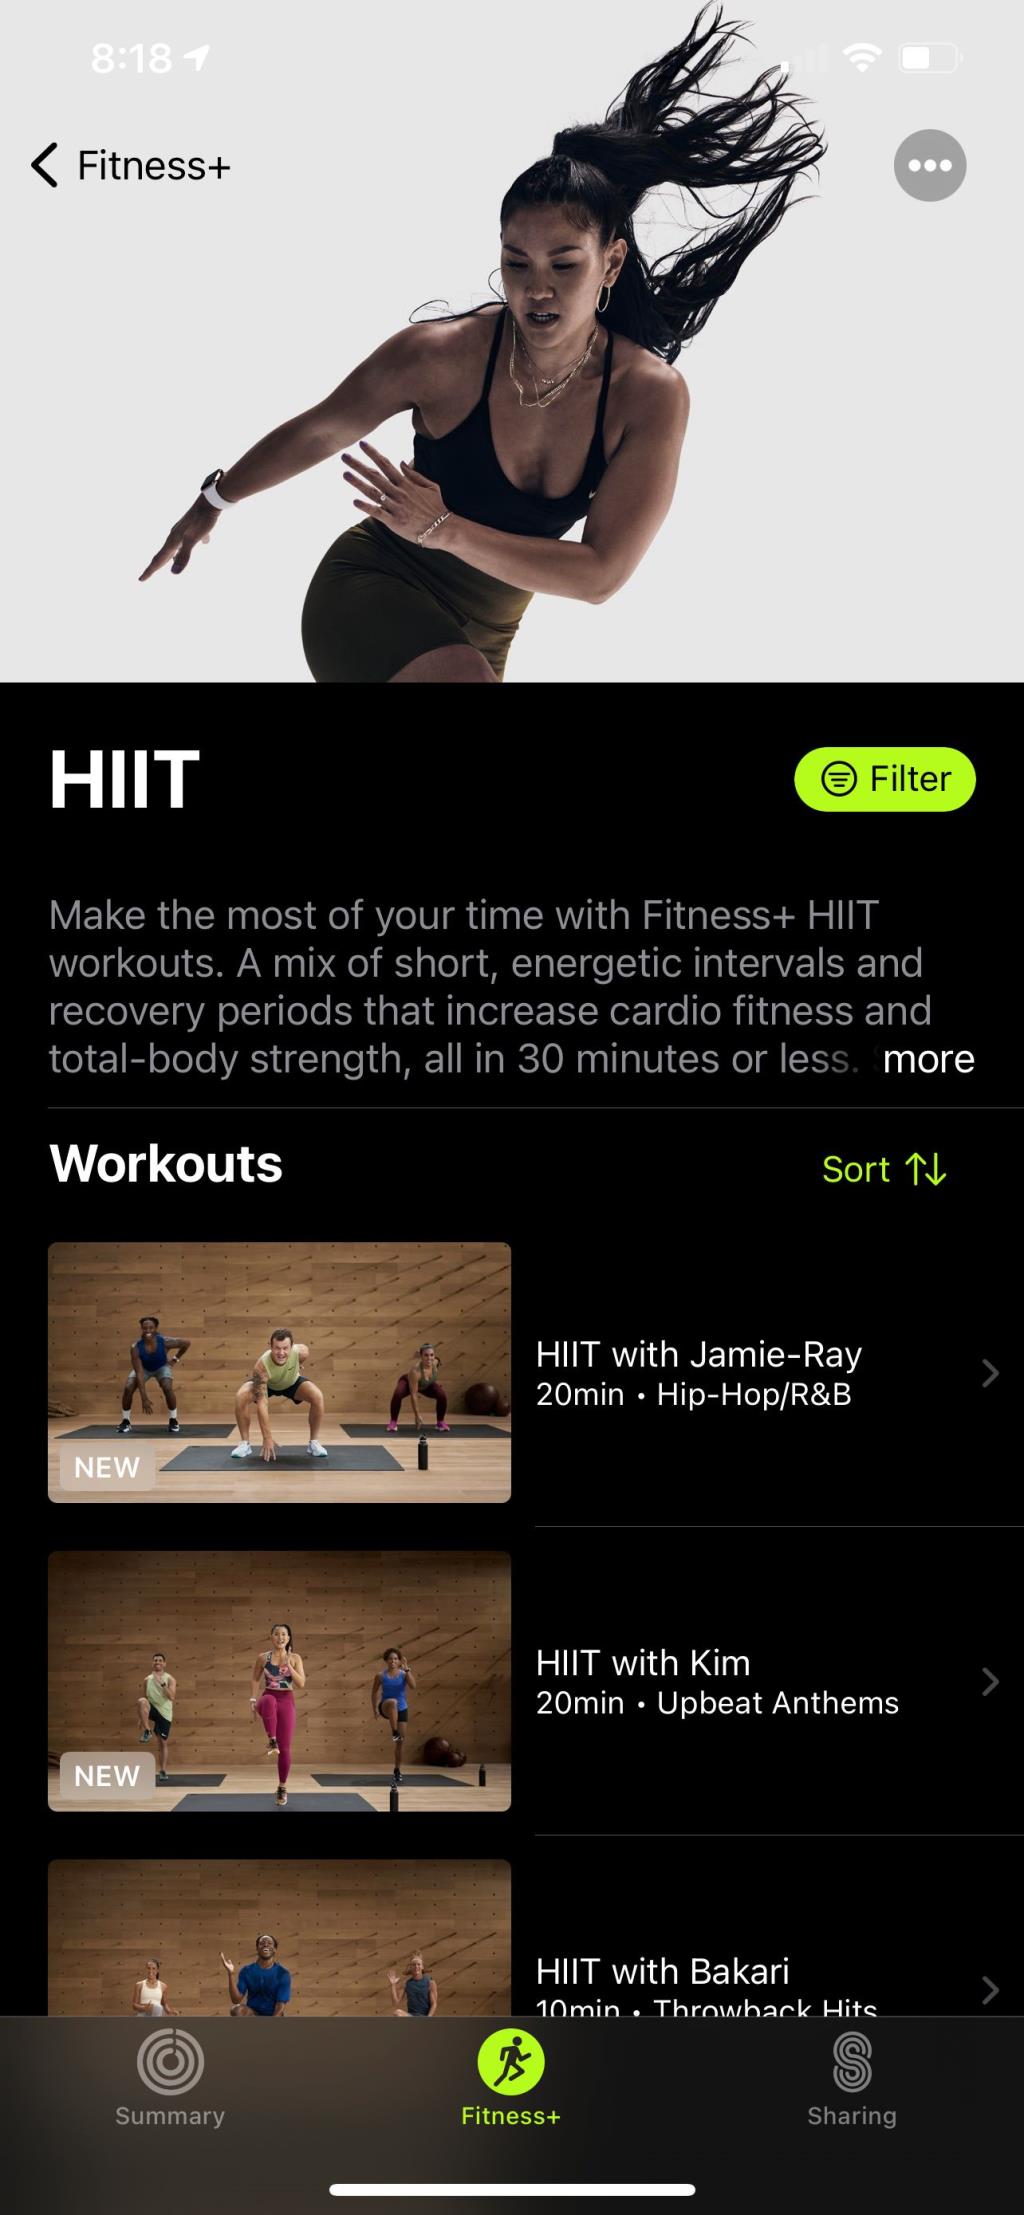 Co to jest Apple Fitness+?